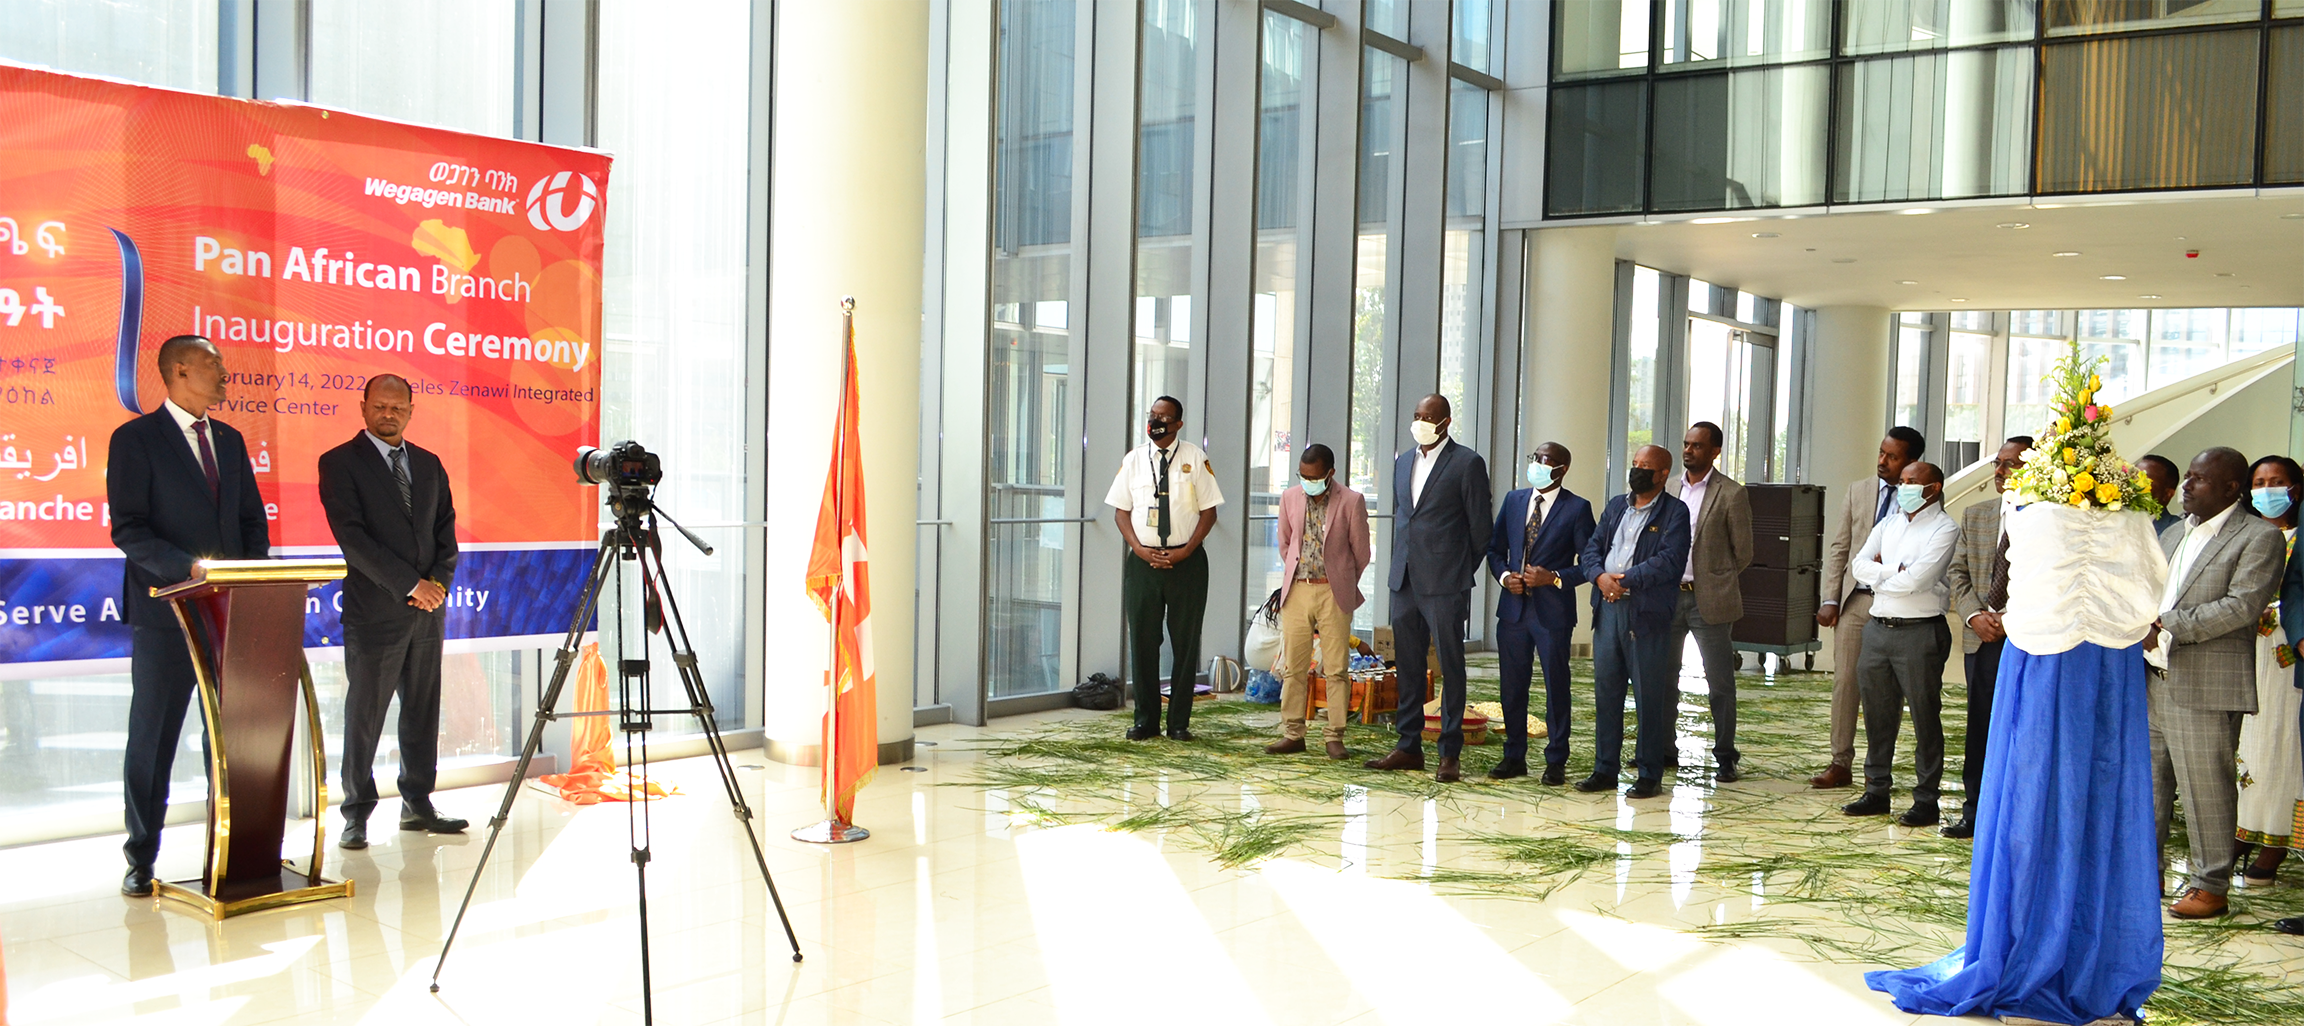 Wegagen Bank’s Pan African Branch located on the Premises of AU officially inaugurated